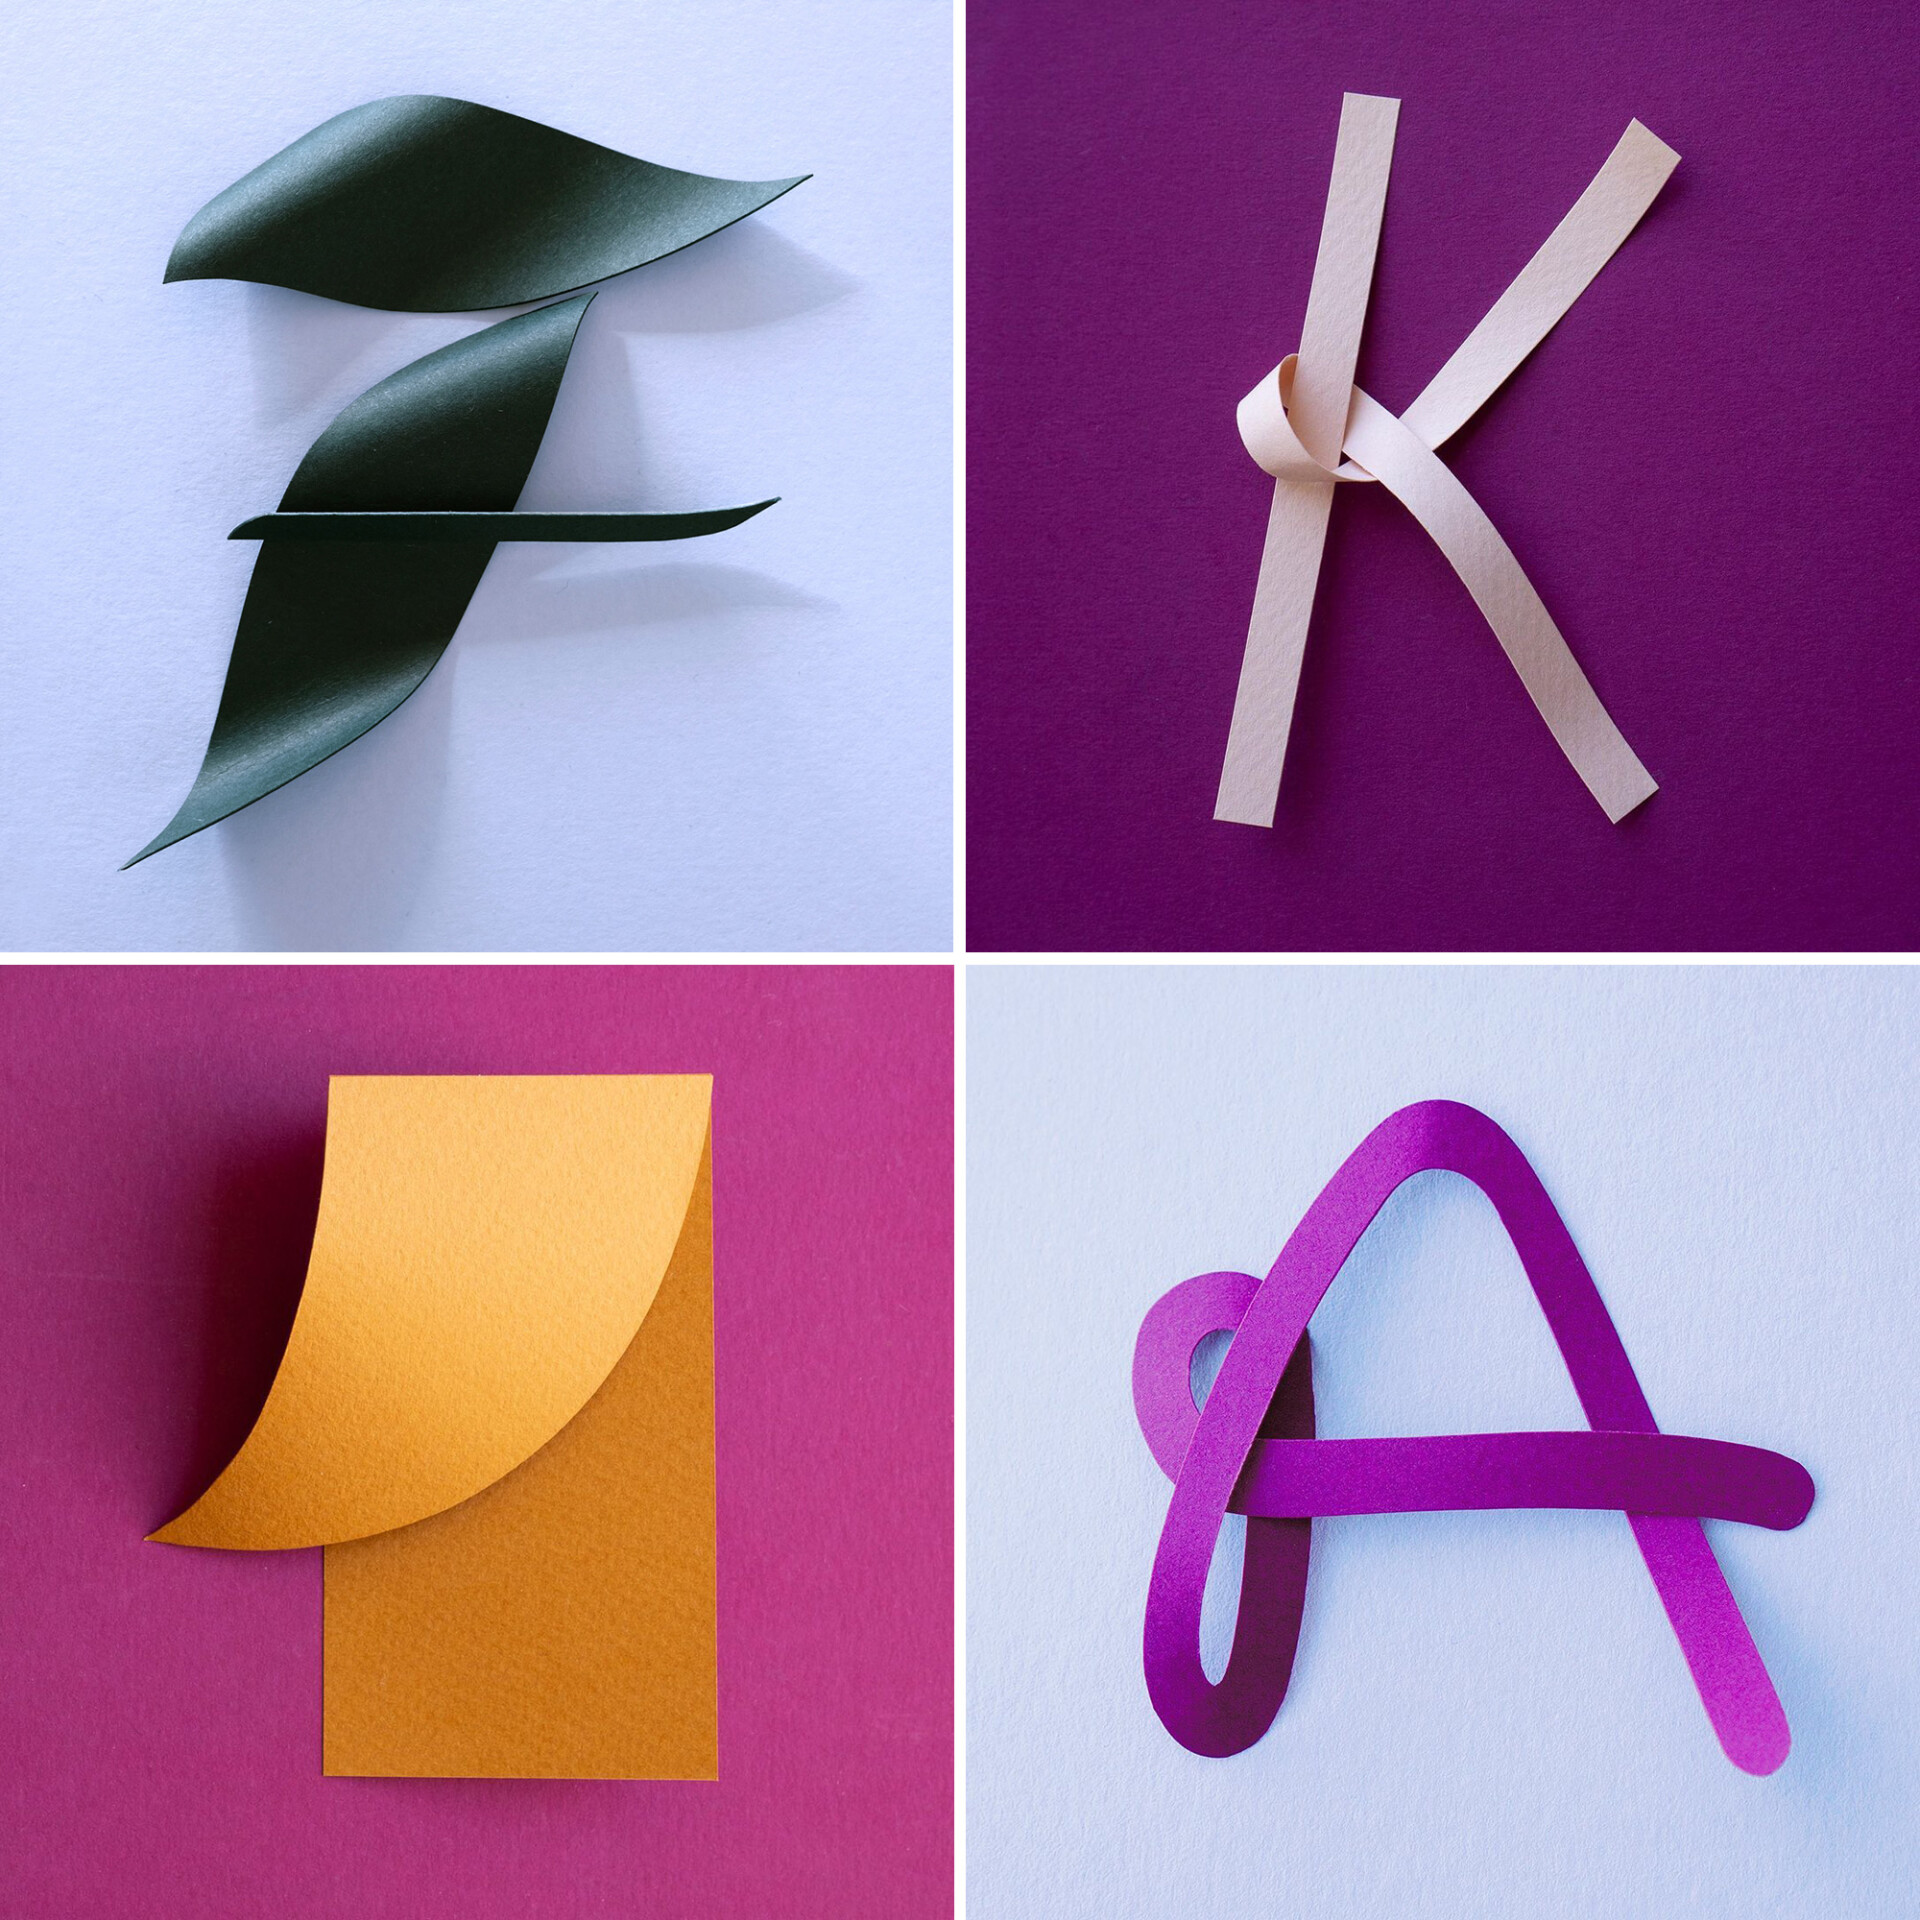 expressive-3d-paper-typography-by-reina-takahashi